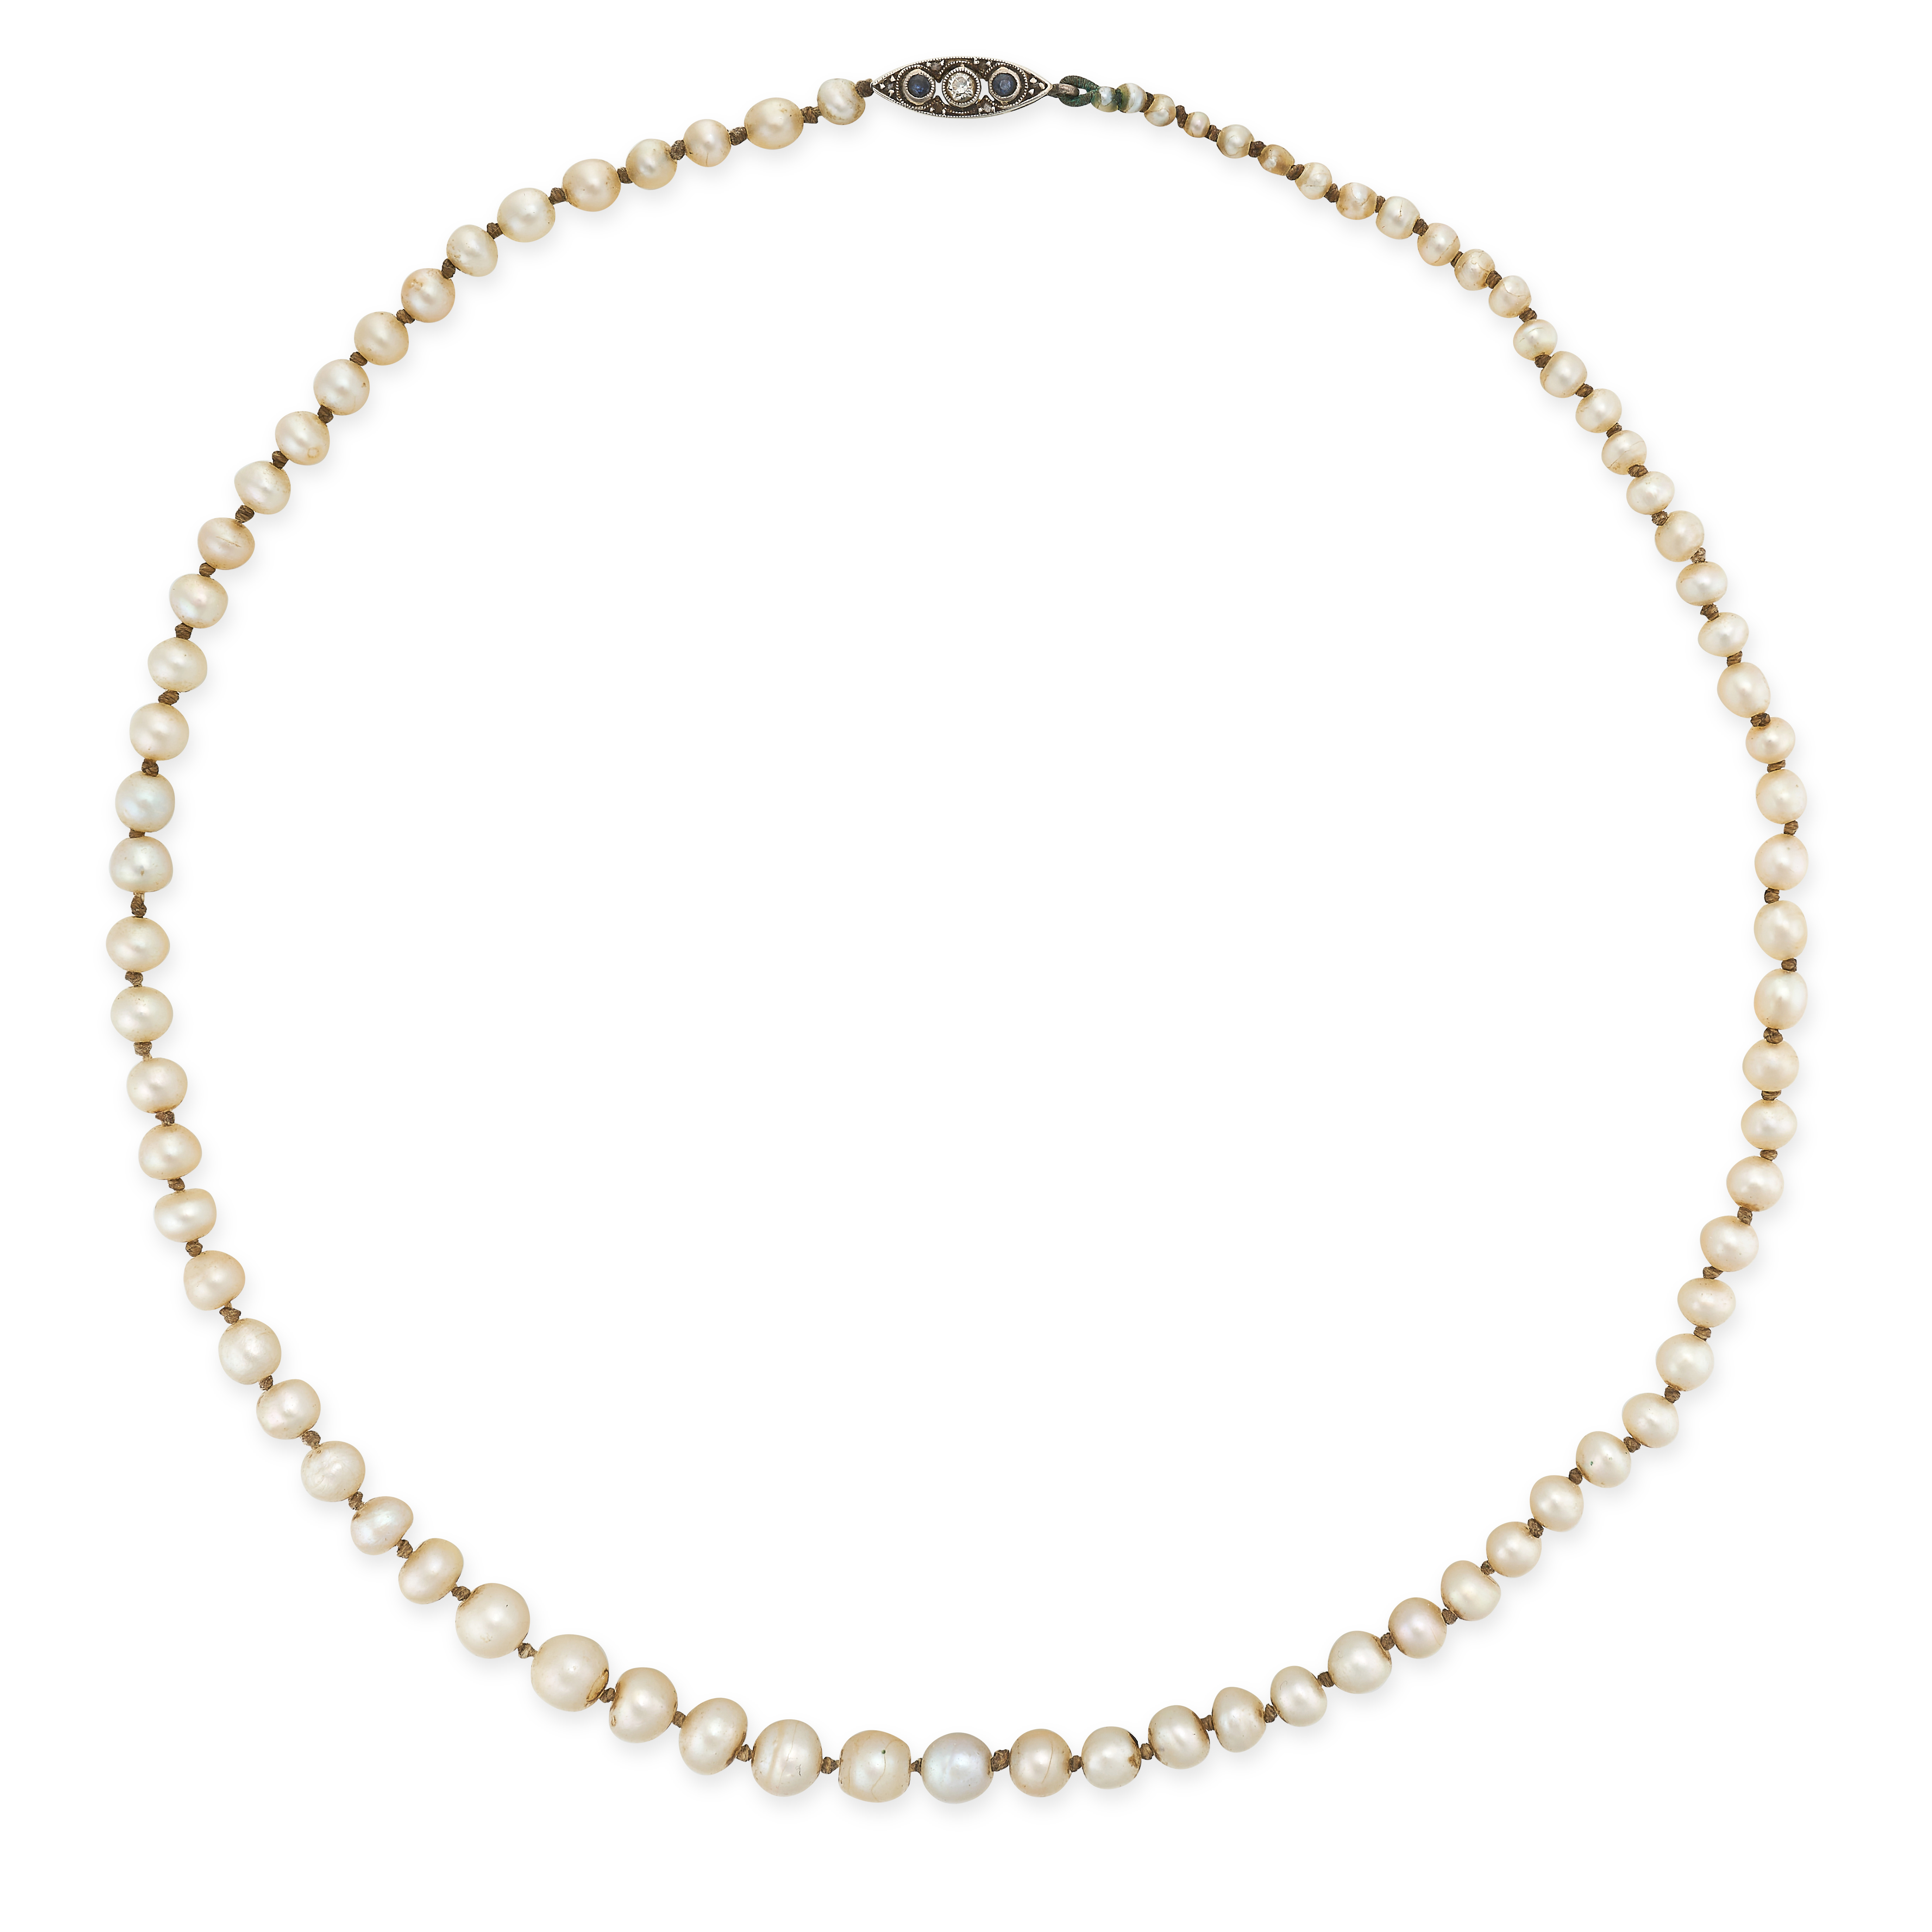 NO RESERVE - AN ANTIQUE NATURAL PEARL, SAPPHIRE AND DIAMOND NECKLACE comprising a single row of